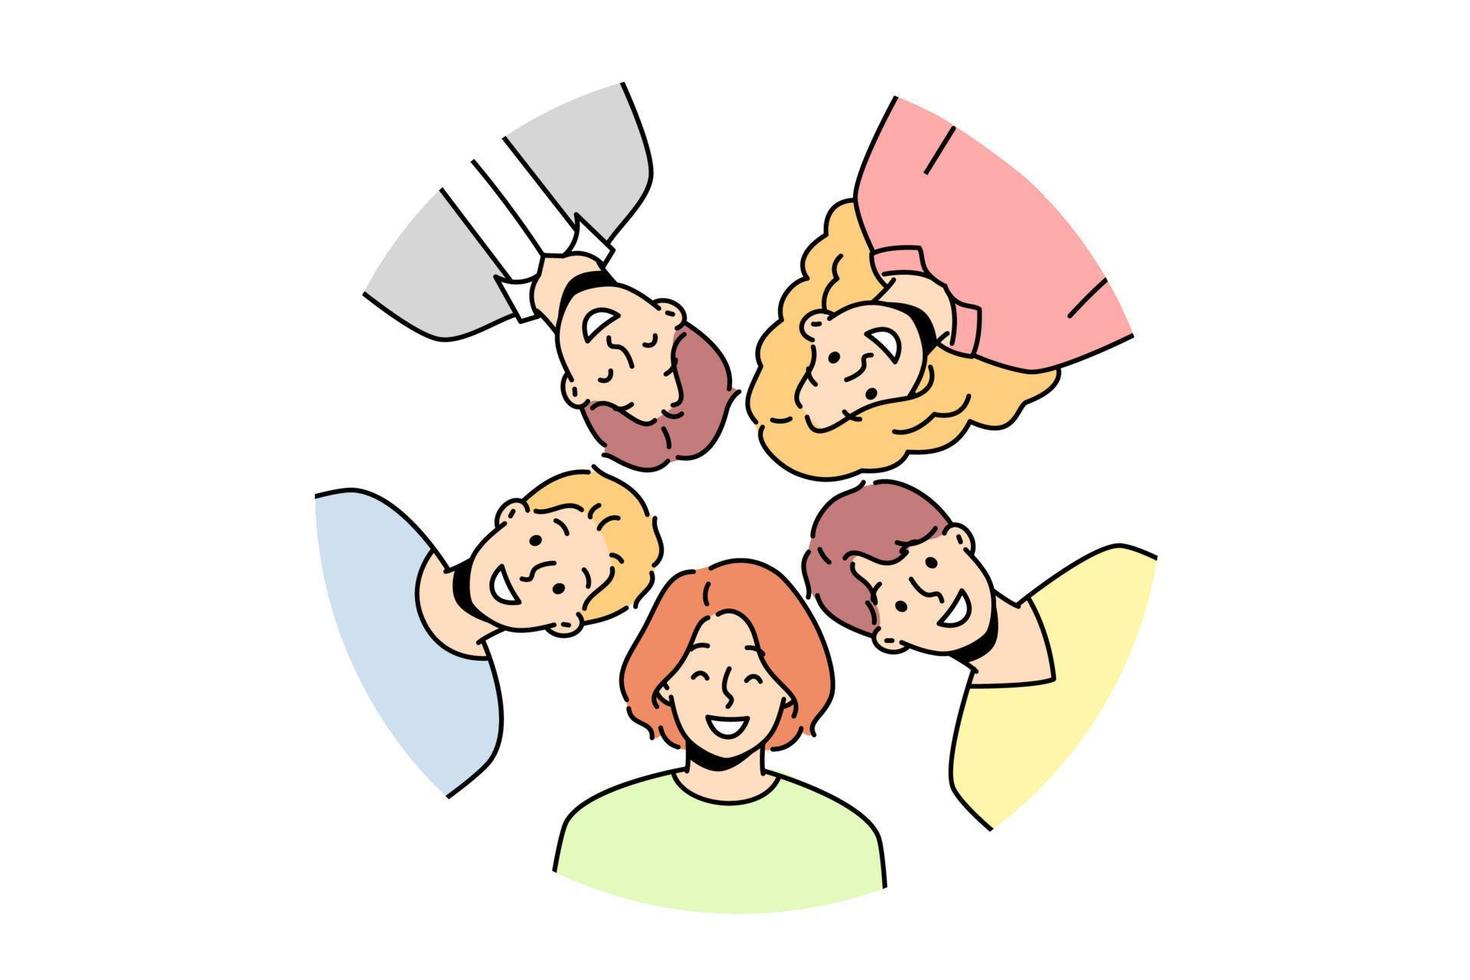 Portrait of smiling diverse friends posing together in circle. Group picture of happy multiracial people show unity and friendship. Vector illustration.